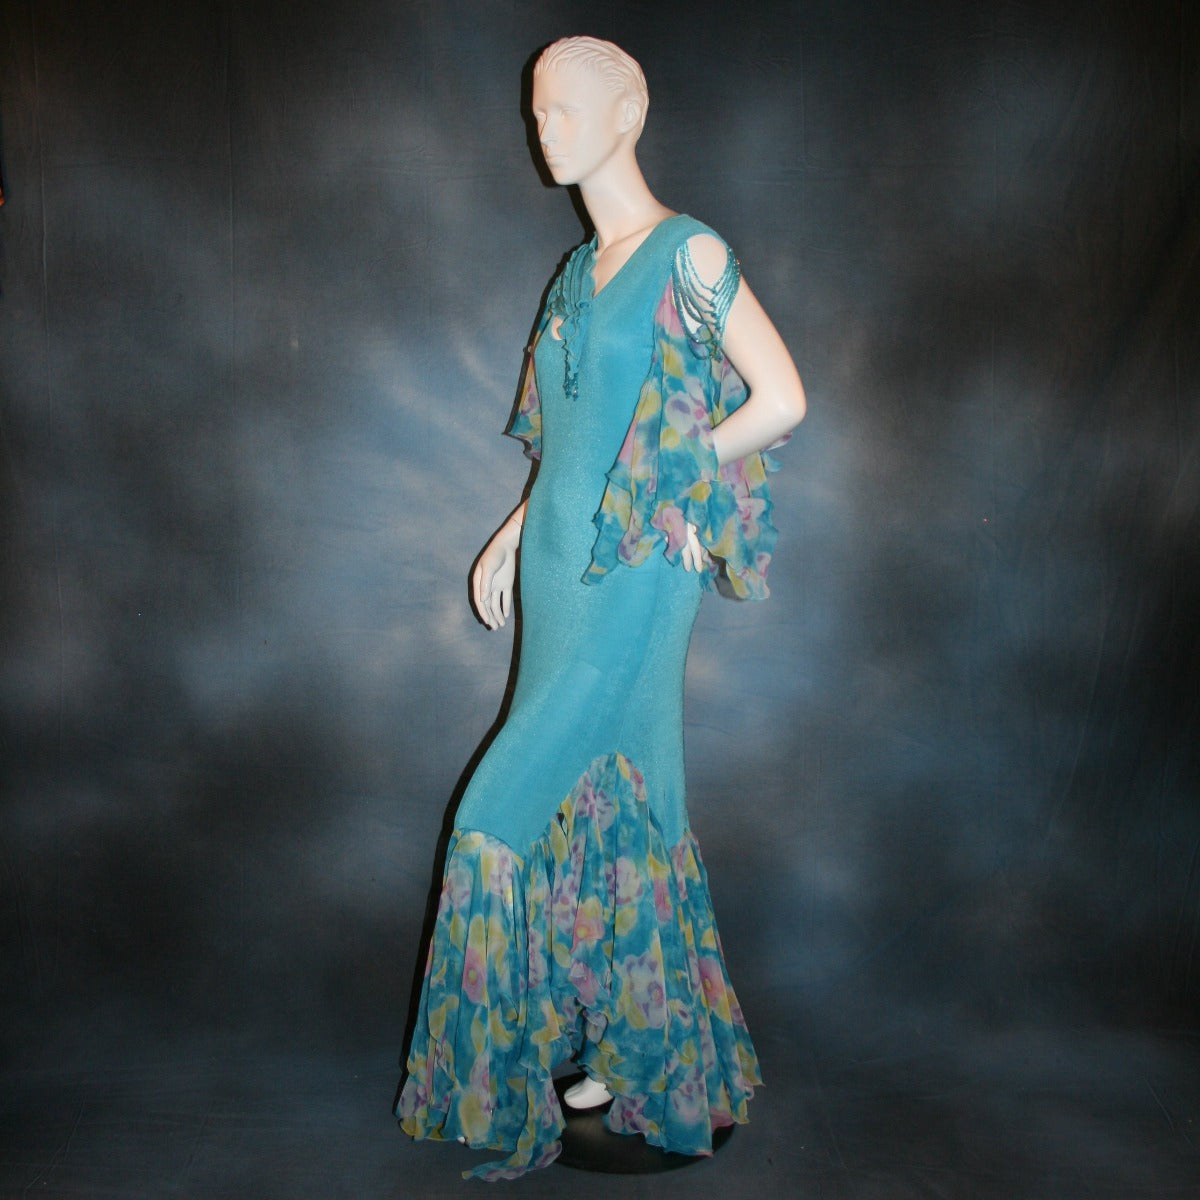 side view of Blue social ballroom dress of luxurious robin egg blue slinky, print chiffon flounces & floats with touches of orchid & yellow, embellished with Swarovski hand beading, is lovely for any ballroom dance or special occasion, and a fabulous beginner ballroom dancer show dress!